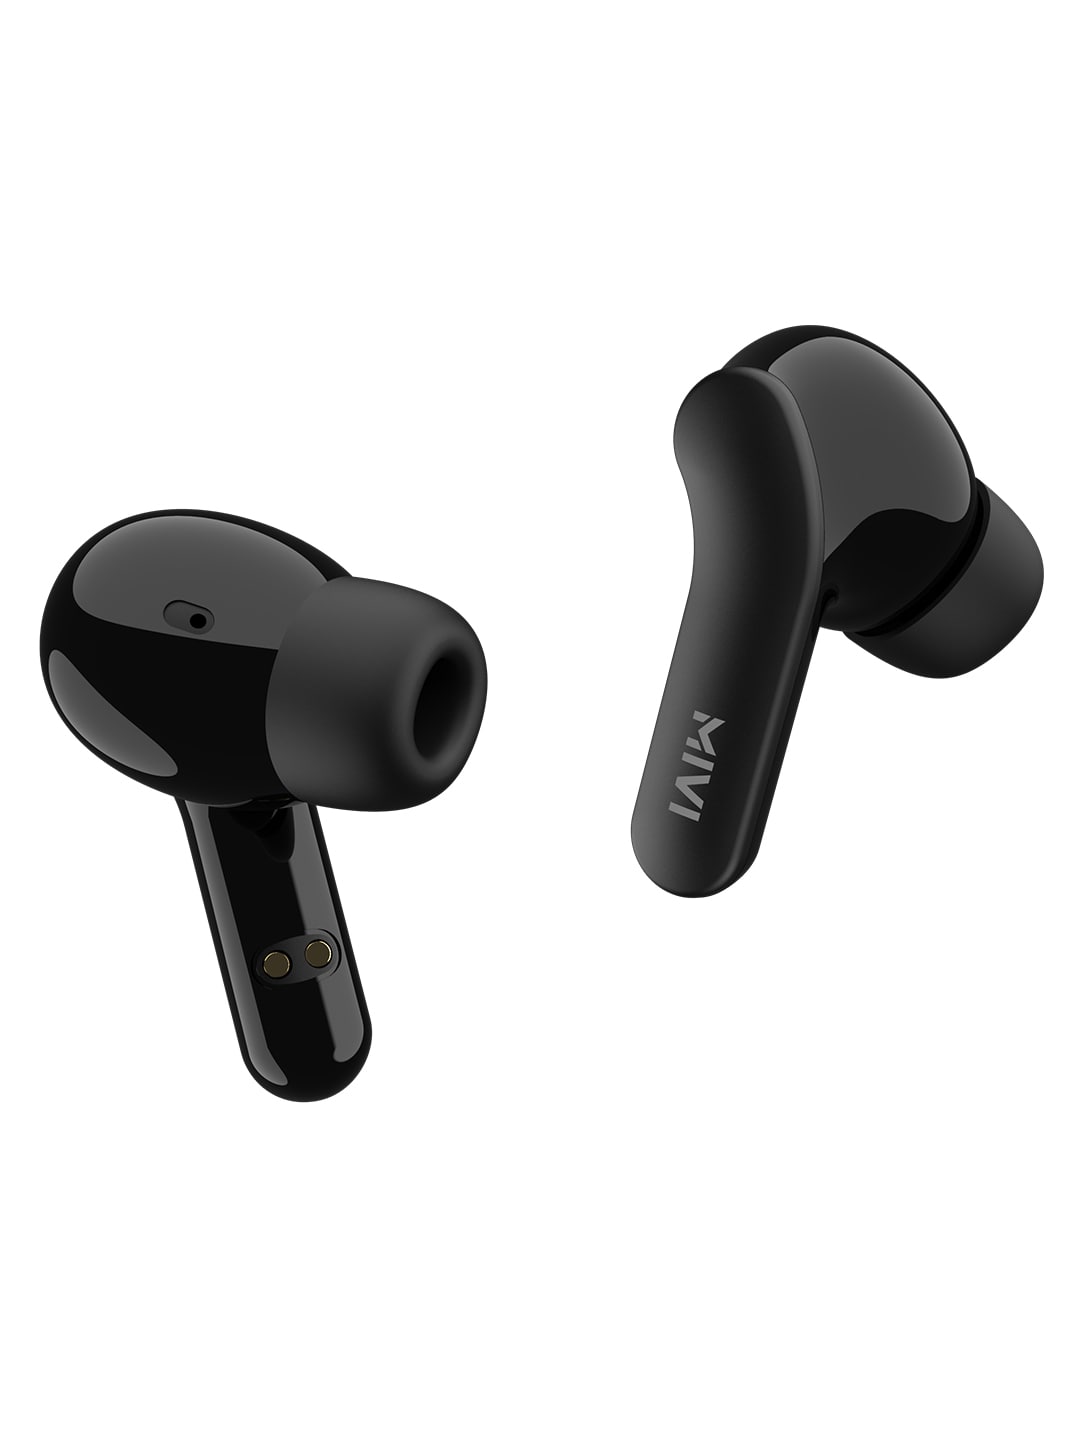 Mivi DuoPods A25 True Wireless Earbuds - Black Price in India